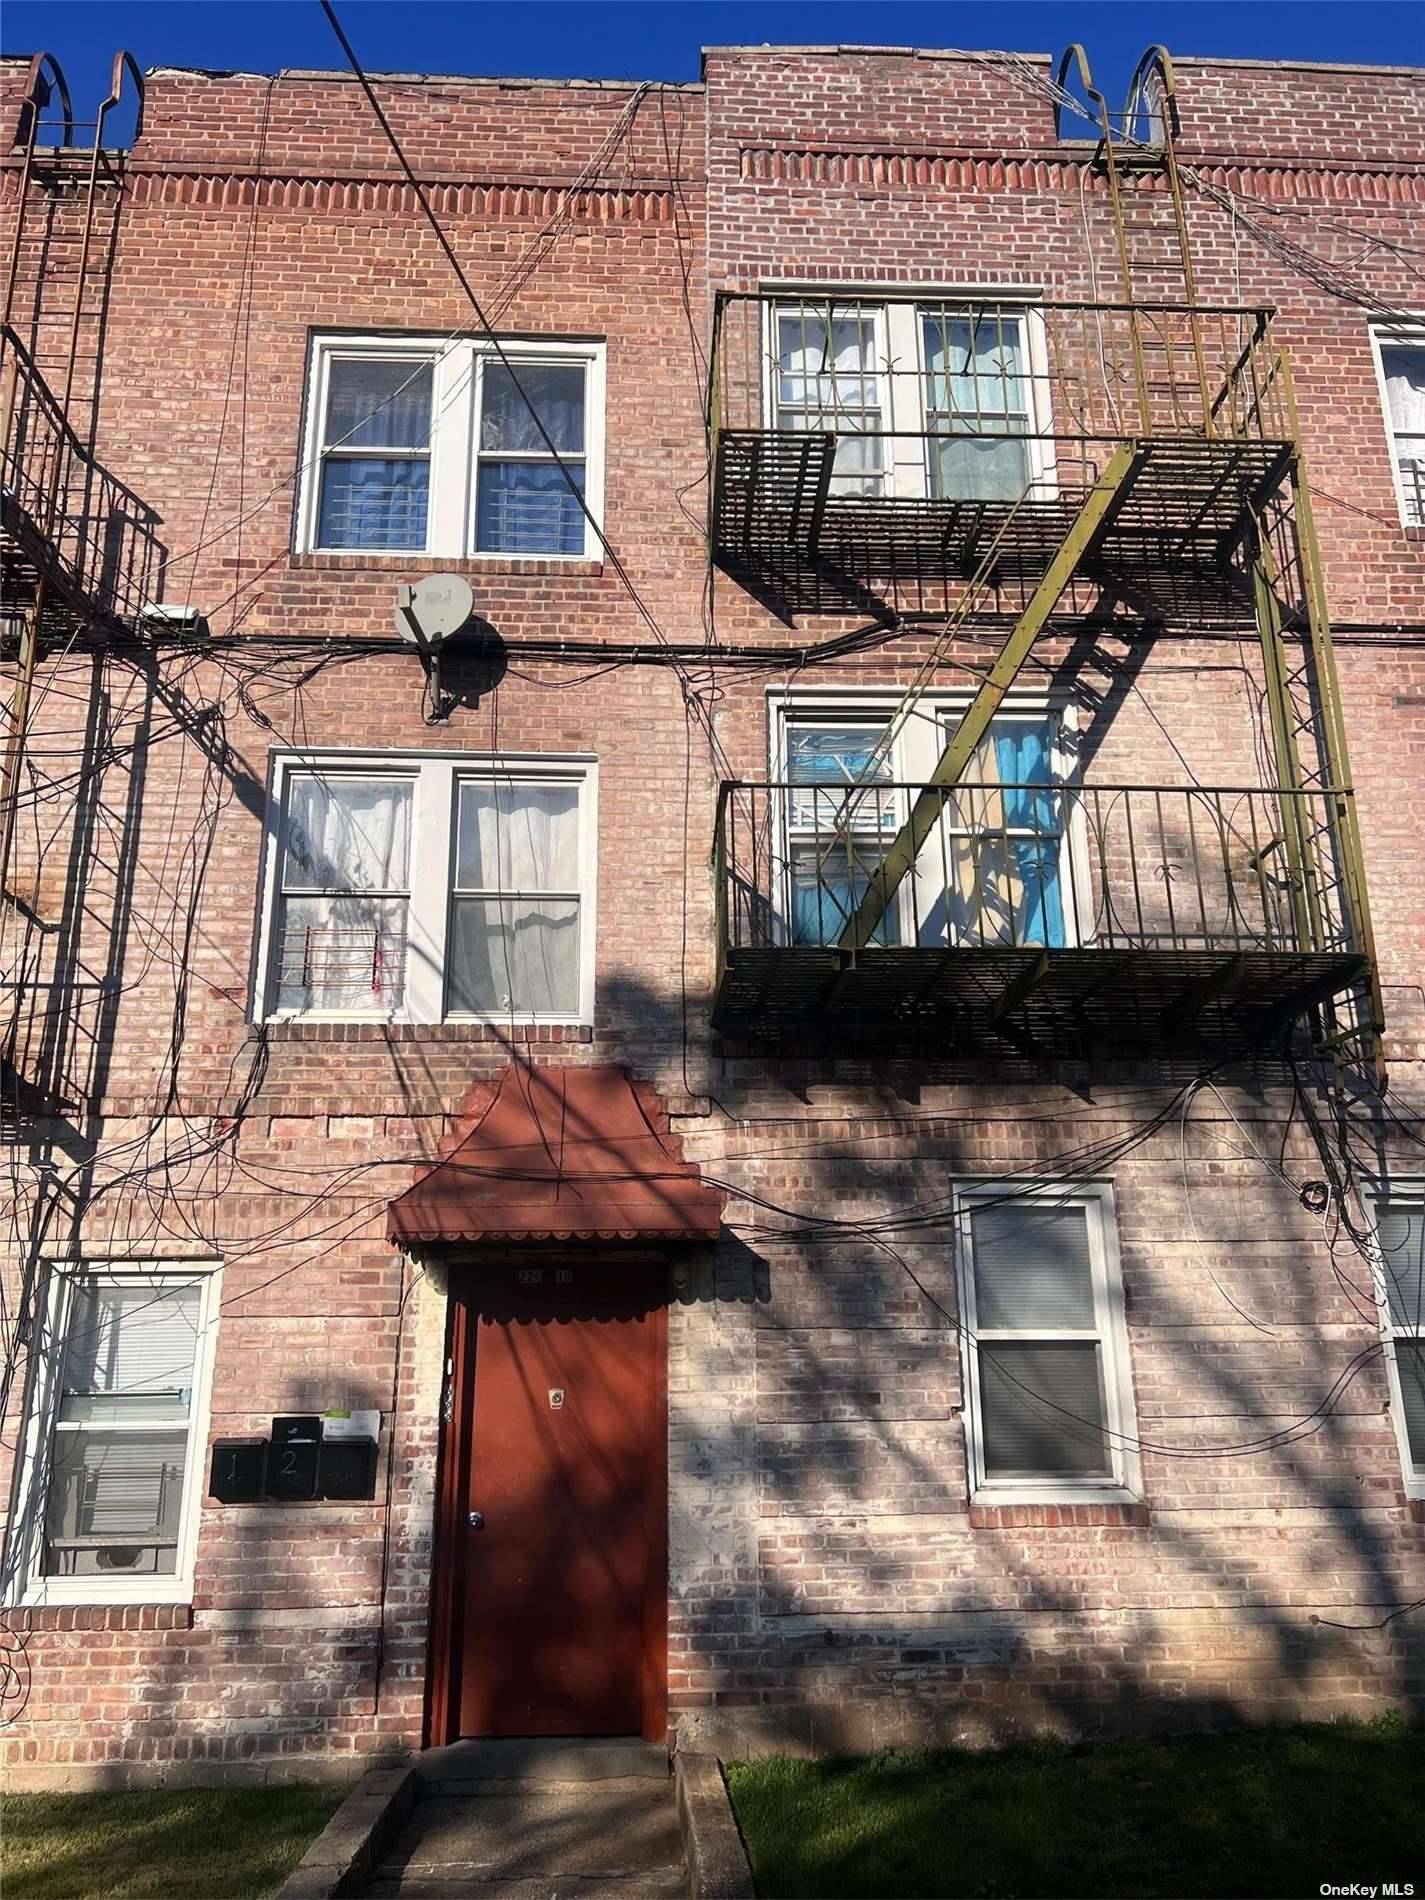 This is a great opportunity to own a mixed use property in the heart of Cambria Heights.